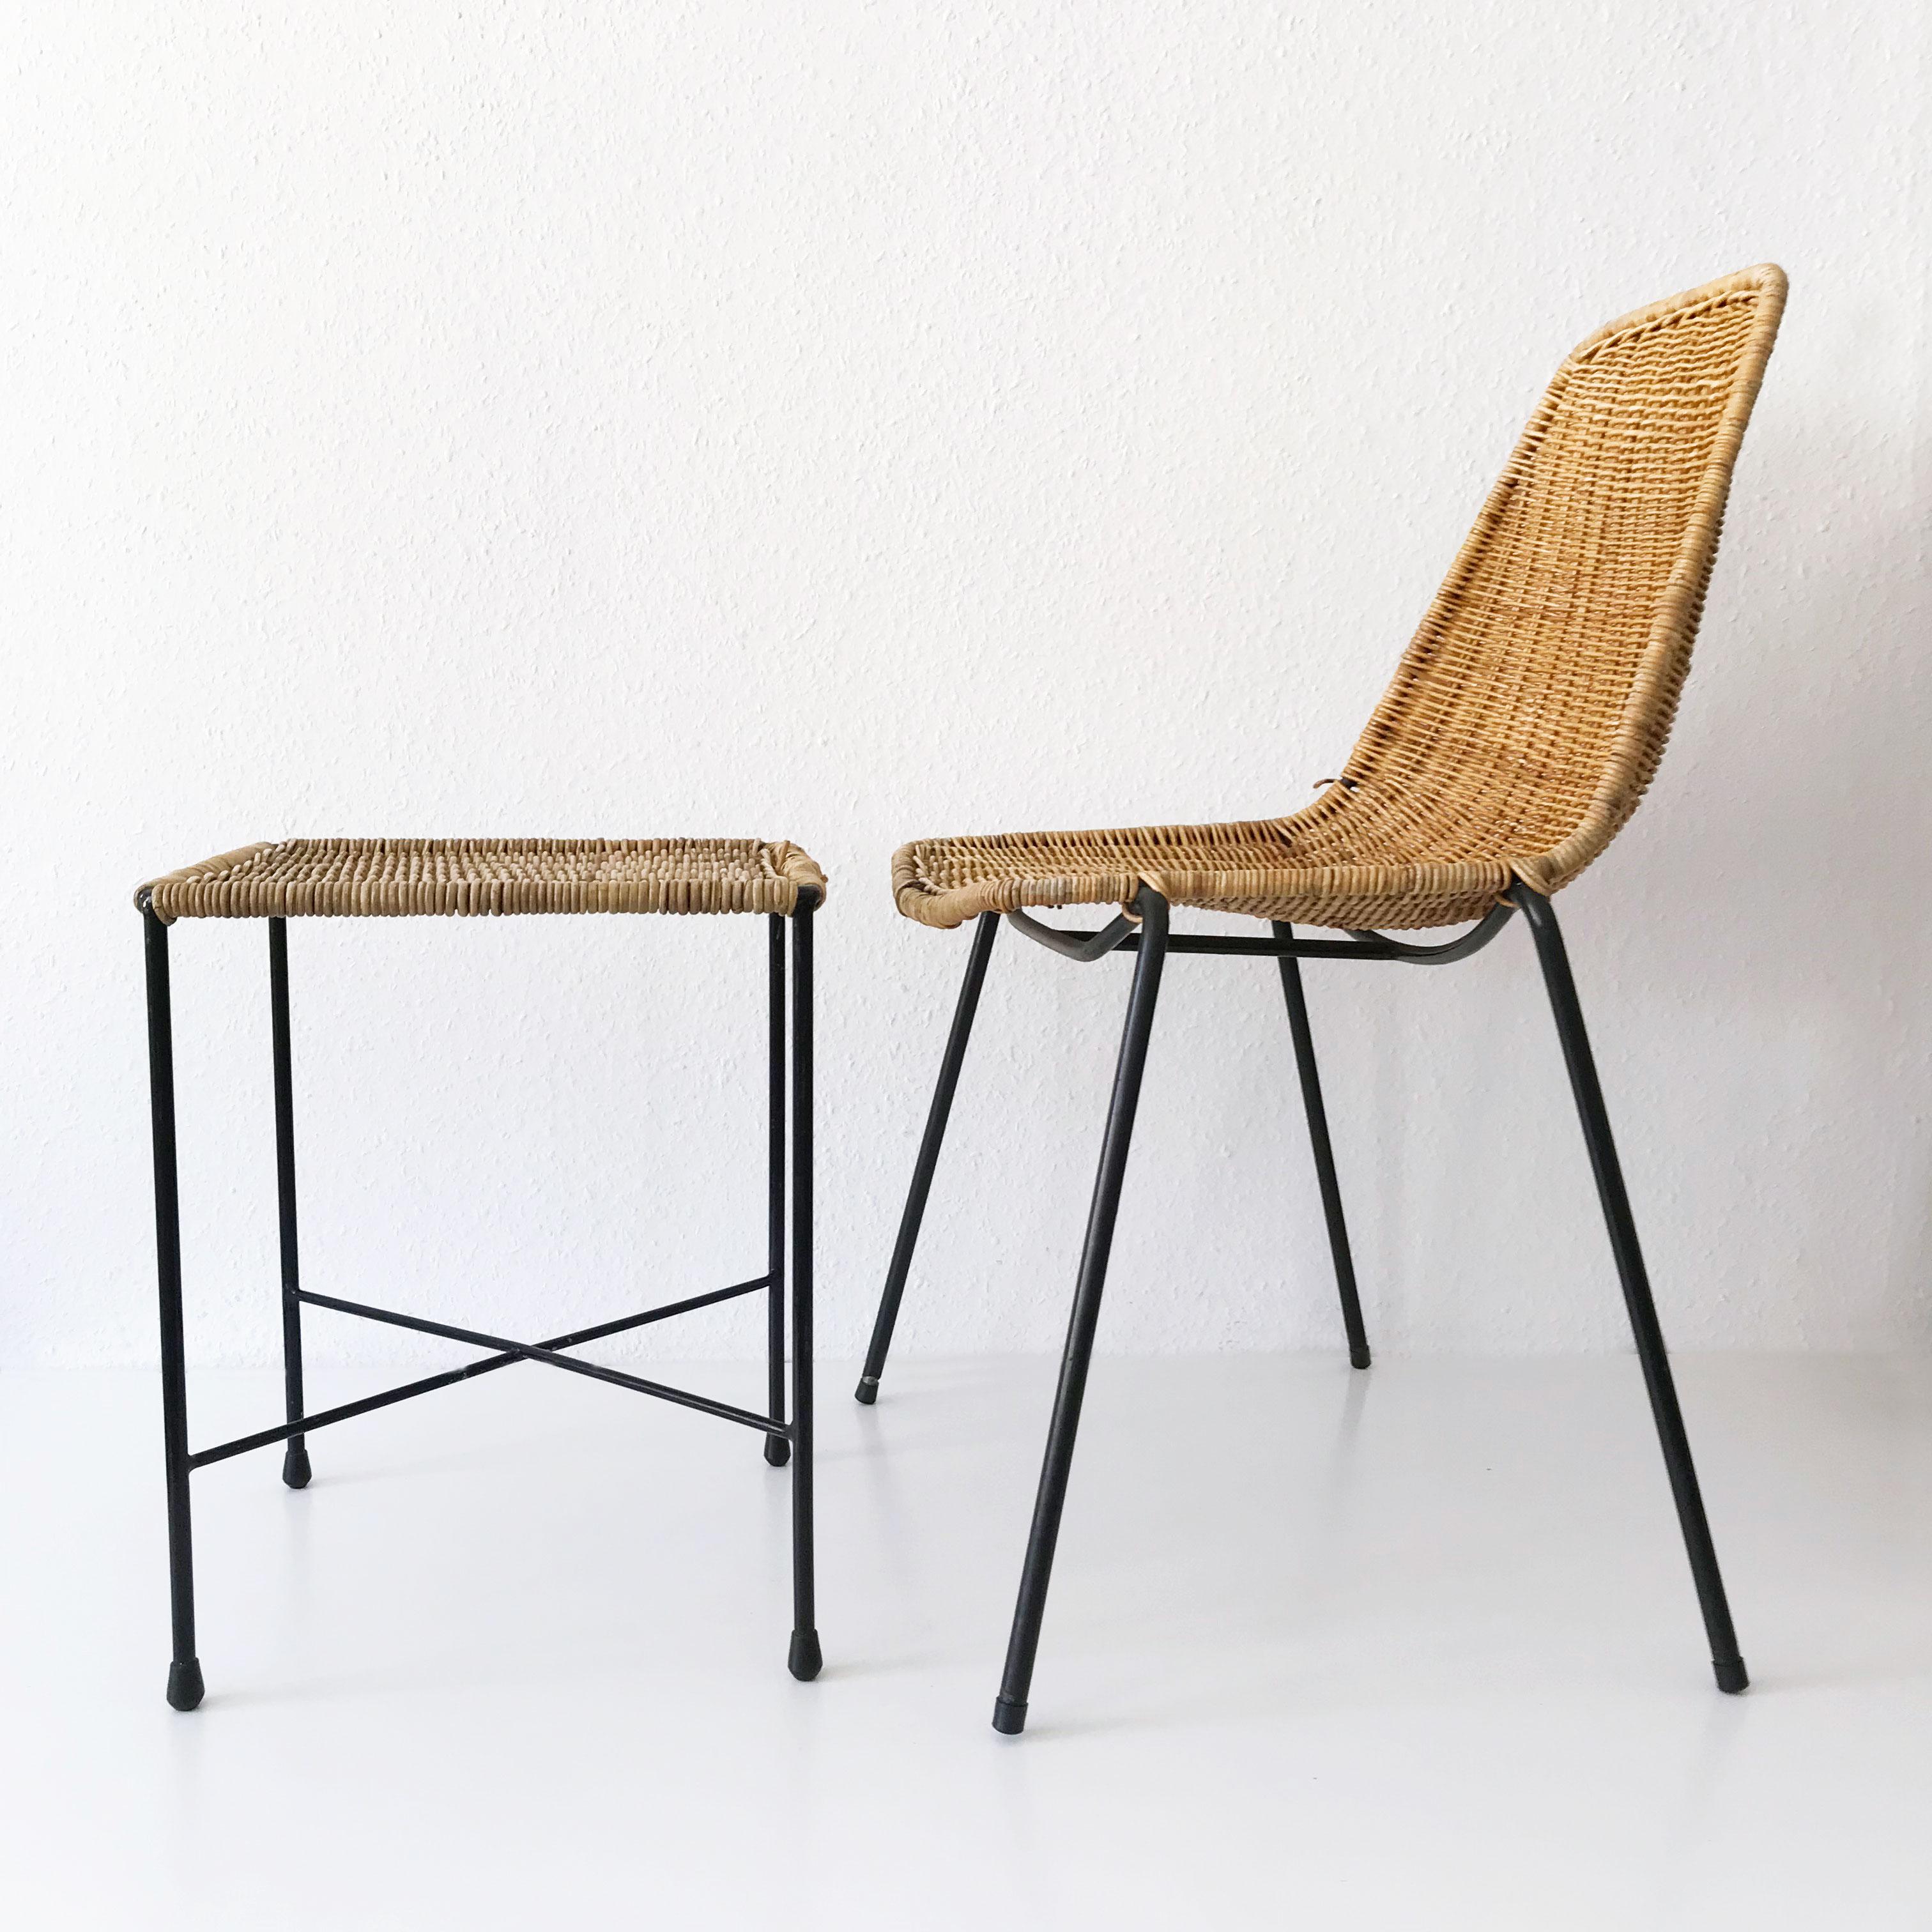 Set of Two Basket Chairs and Stool by Gian Franco Legler, 1951, Switzerland 6